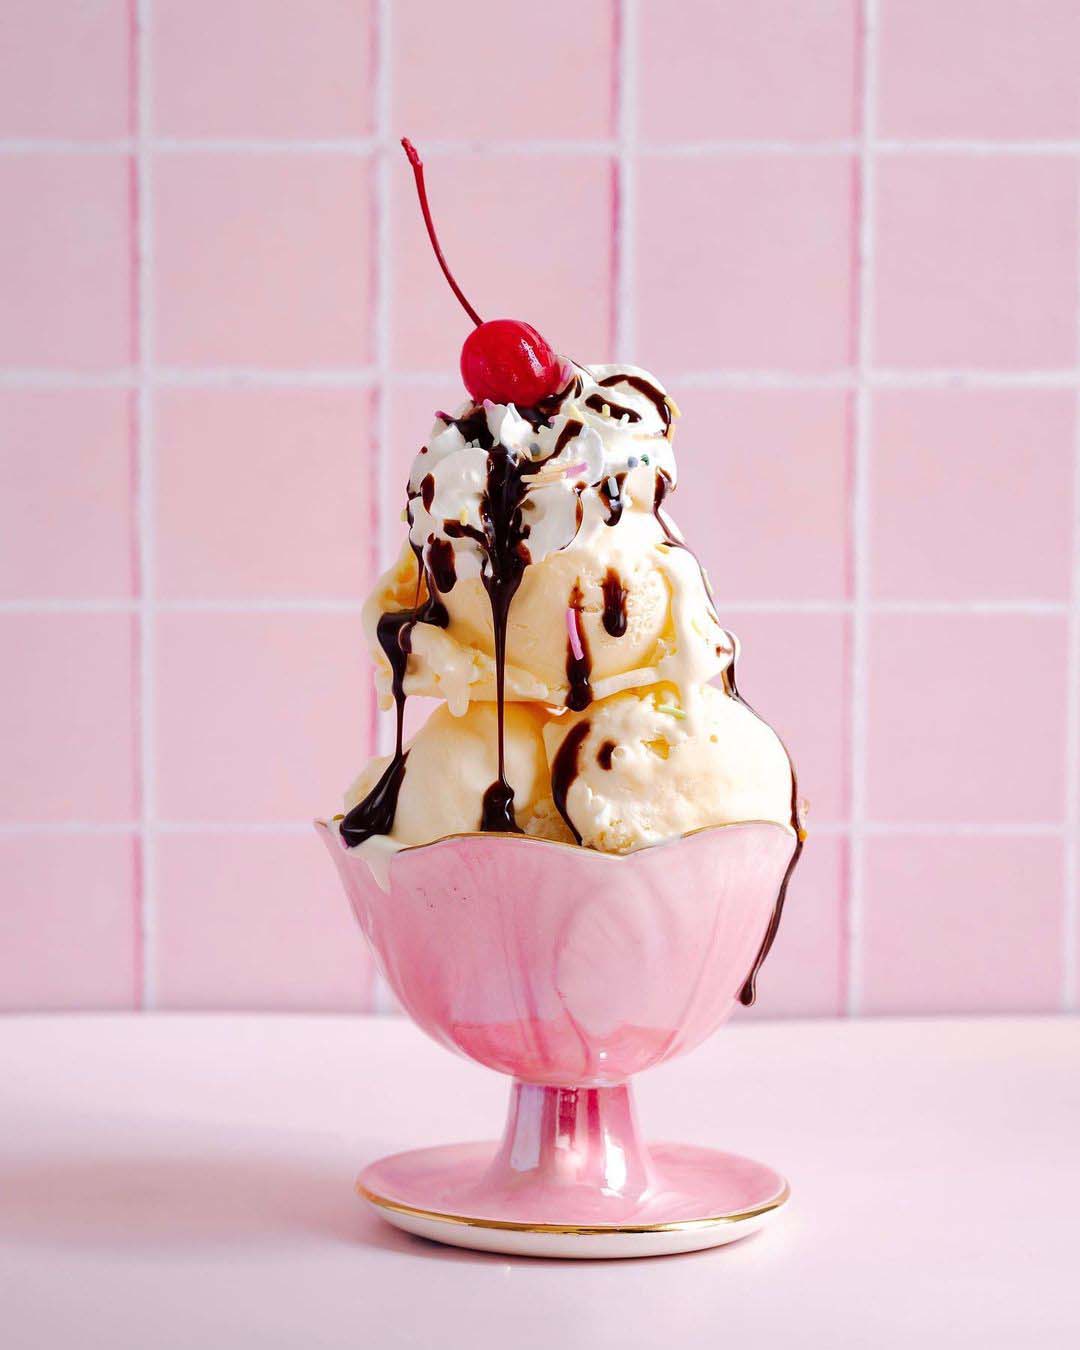 backdrop collective - cherry on ice cream sundae photographed with pink rose quartz tile waterproof photography backdrop 